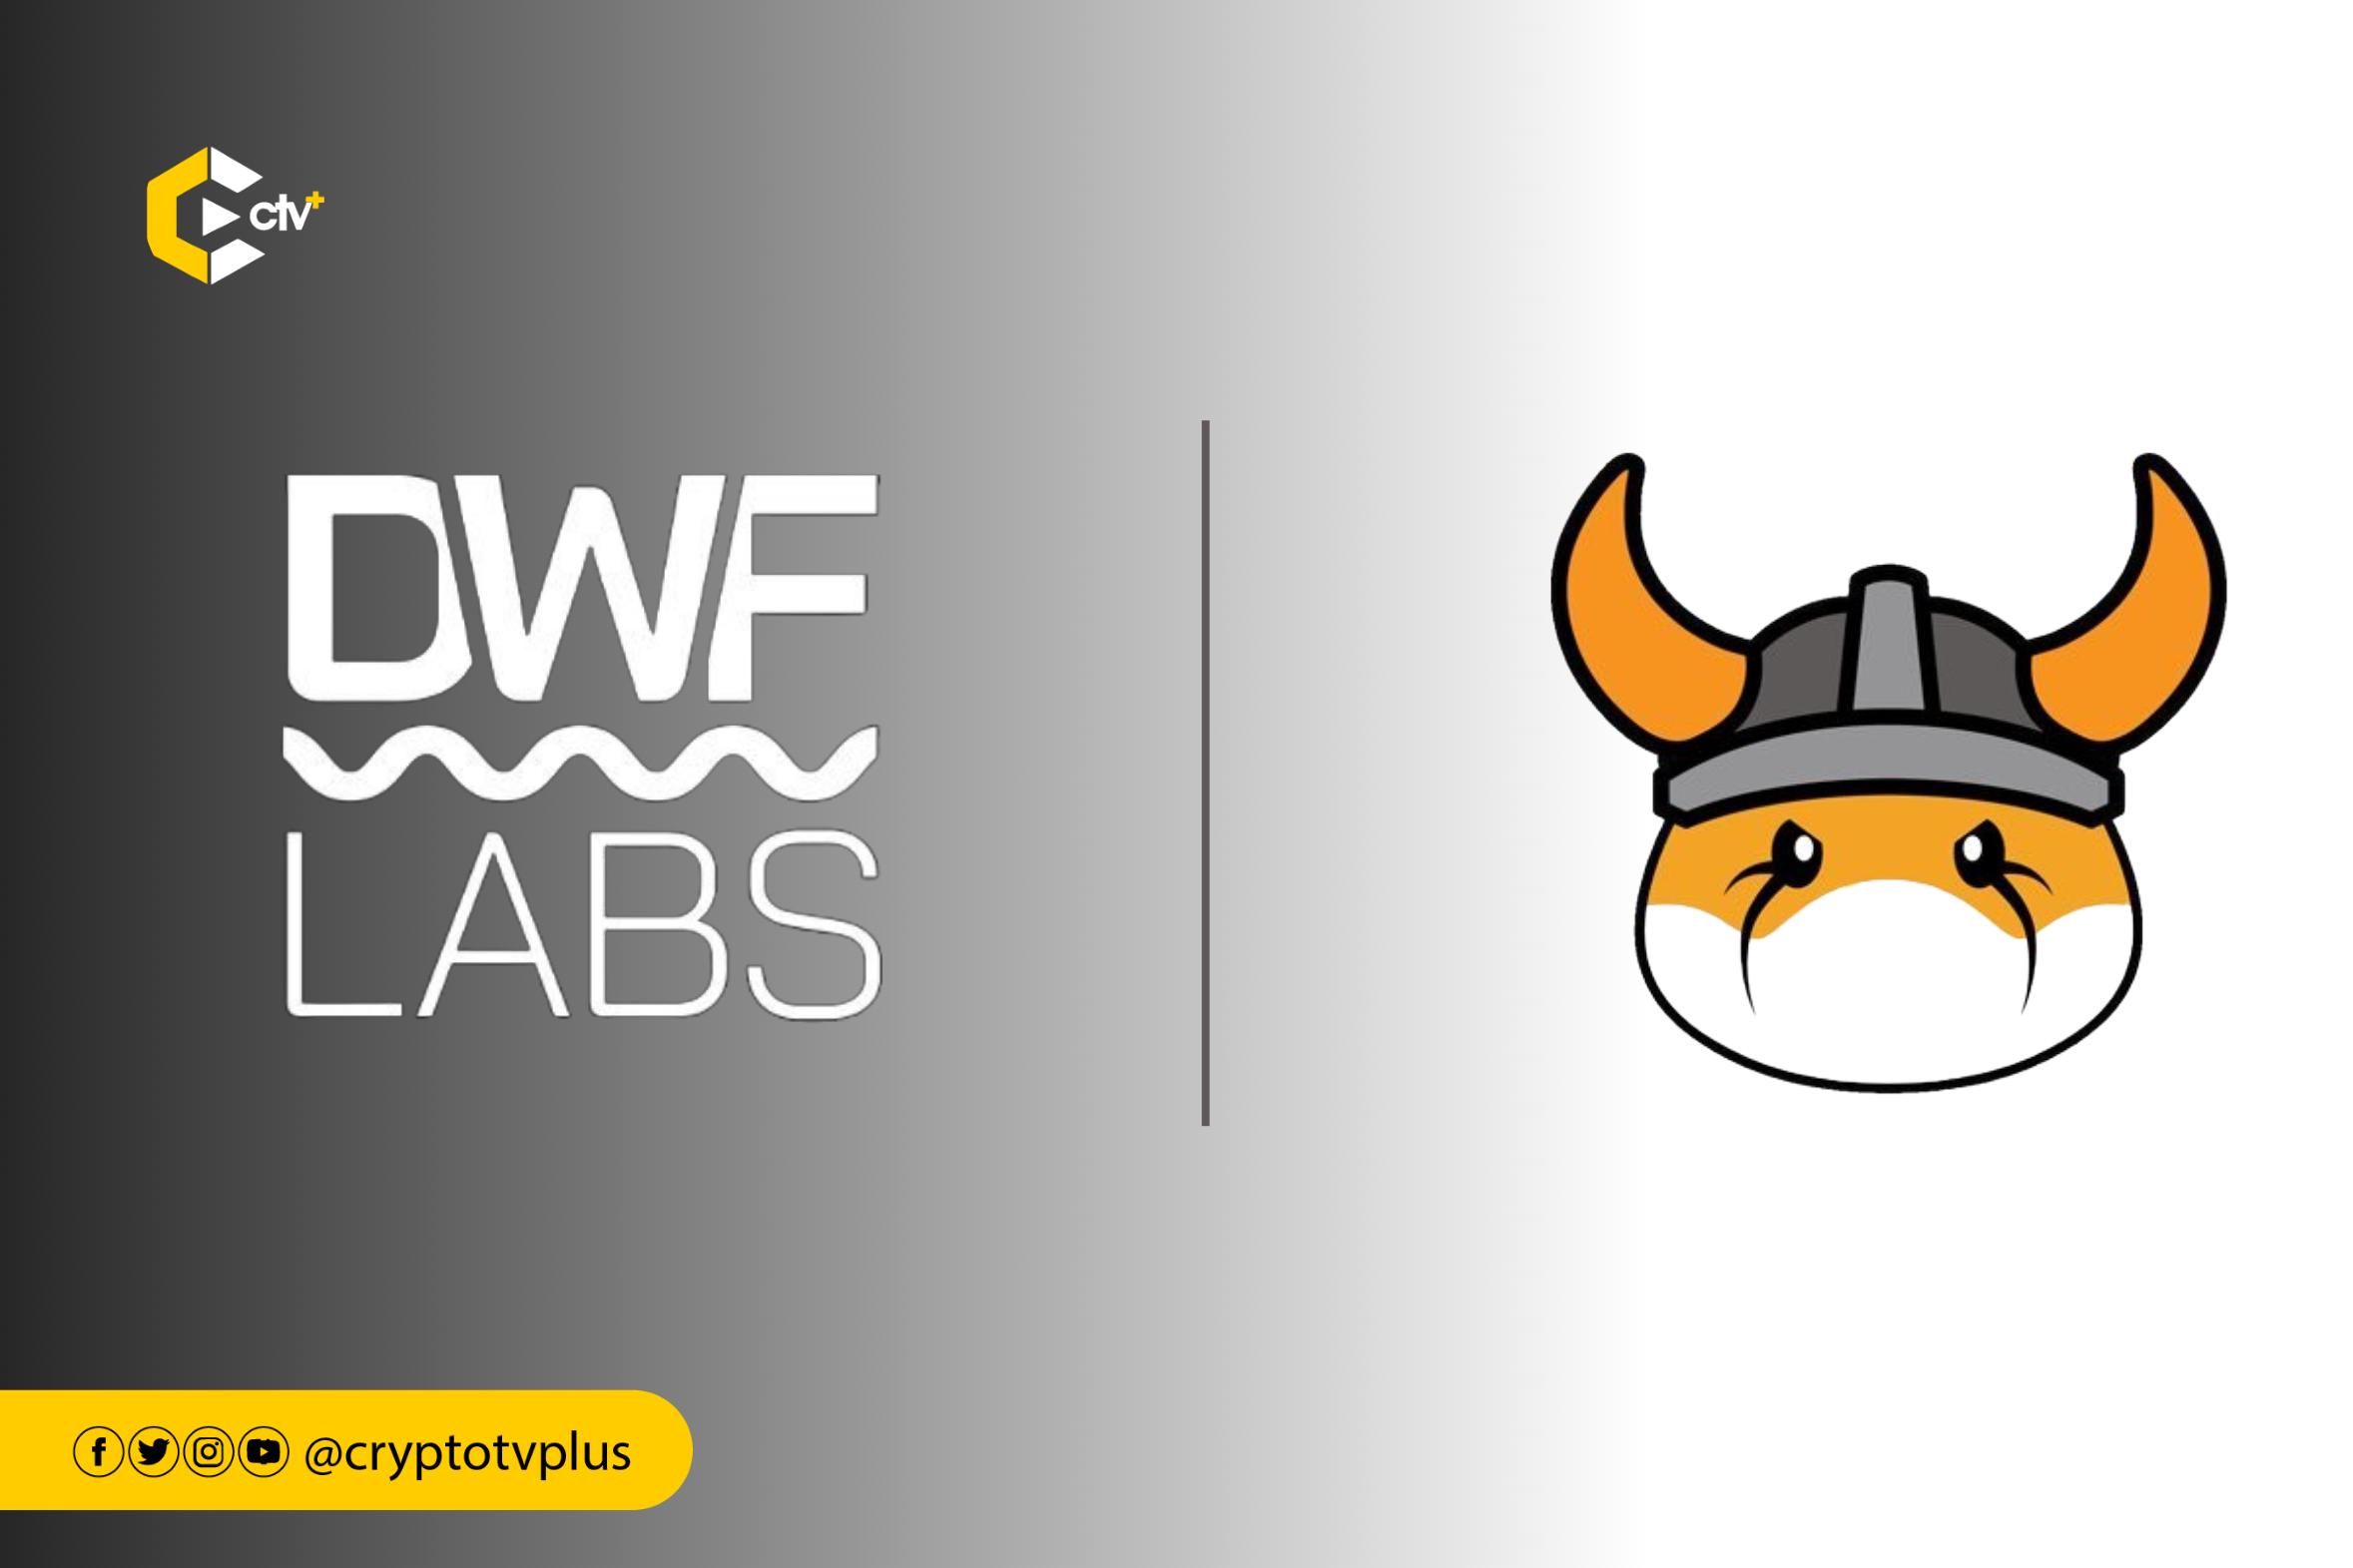 After purchasing $10M worth of Floki earlier, DWF Labs doubles down its investment in Floki by buying an additional $12 million.